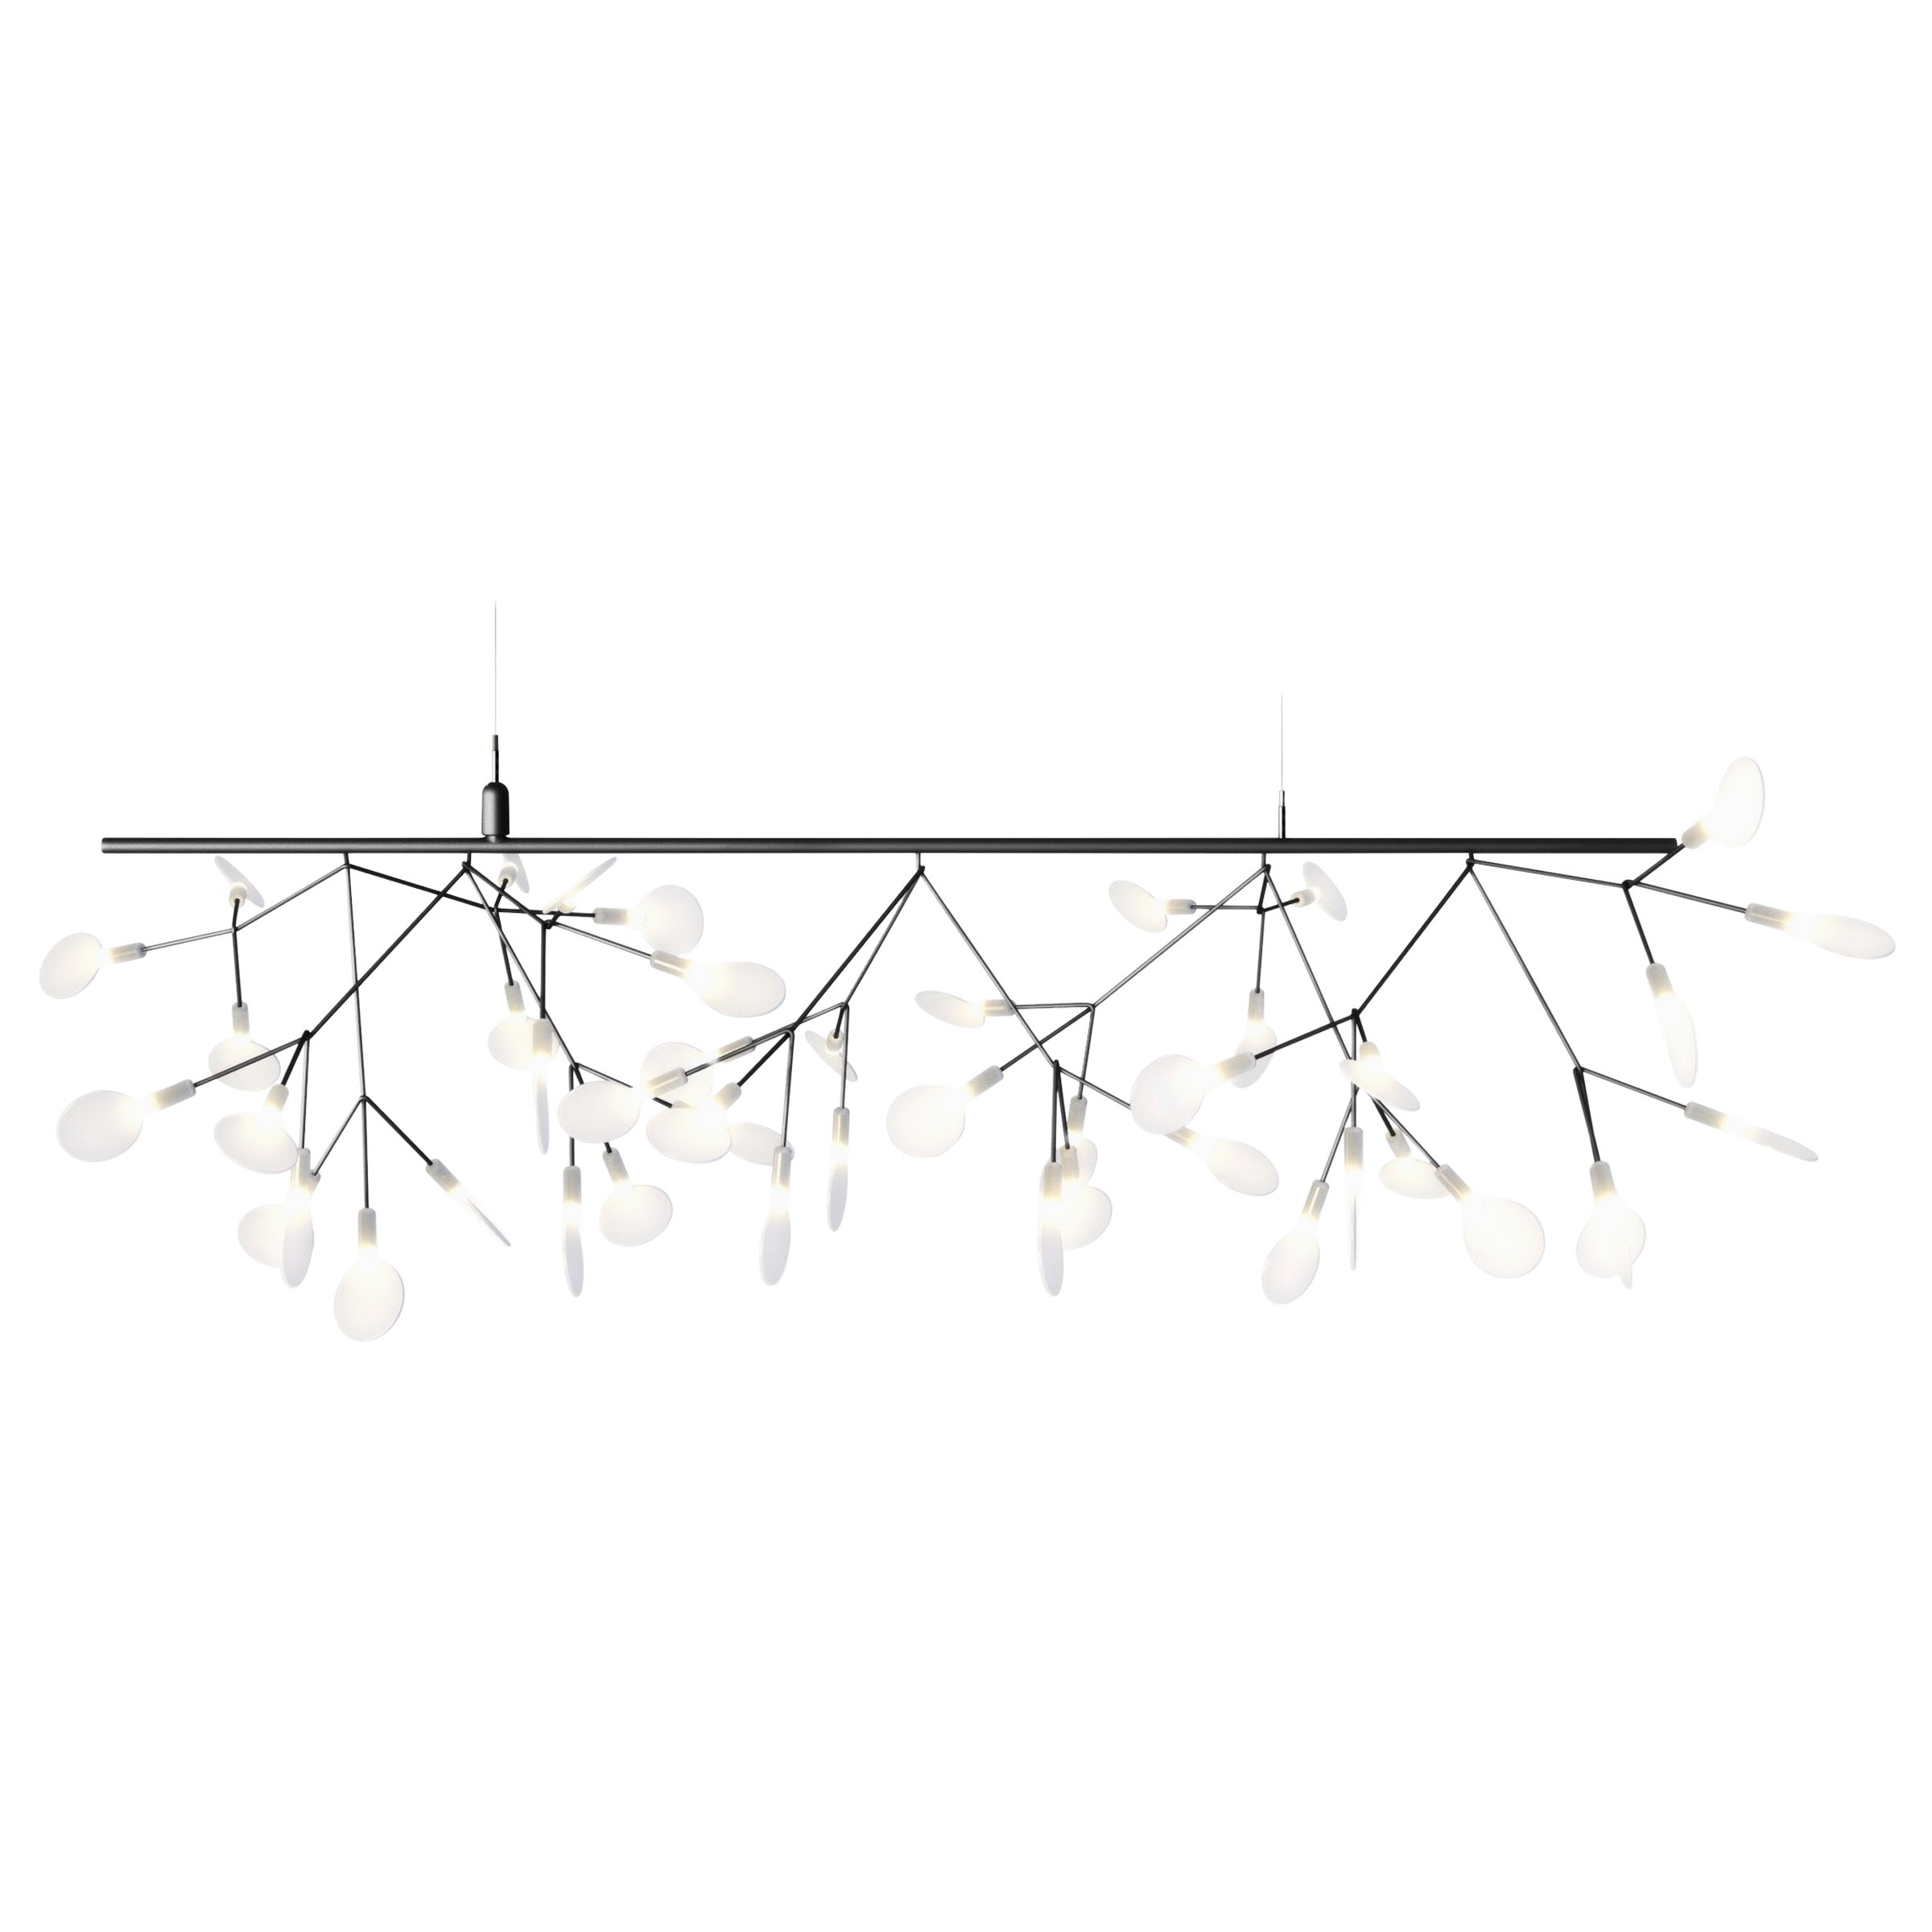 Moooi Heracleum Endless Suspension Lamp in Nickel with Polycarbonate Lenses